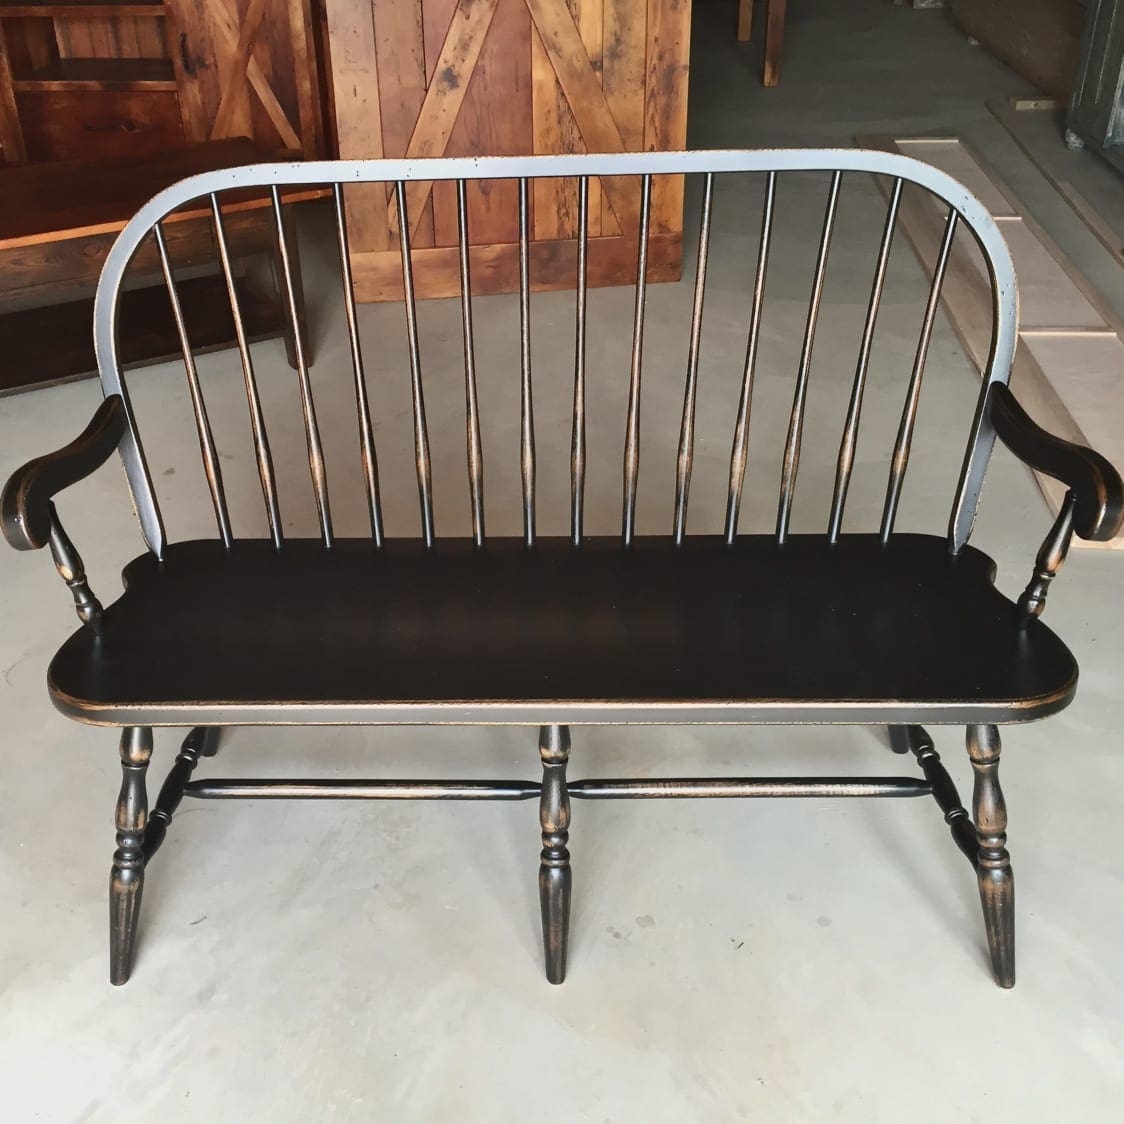 New England Windsor Bench, Bench Seat, Black Bench